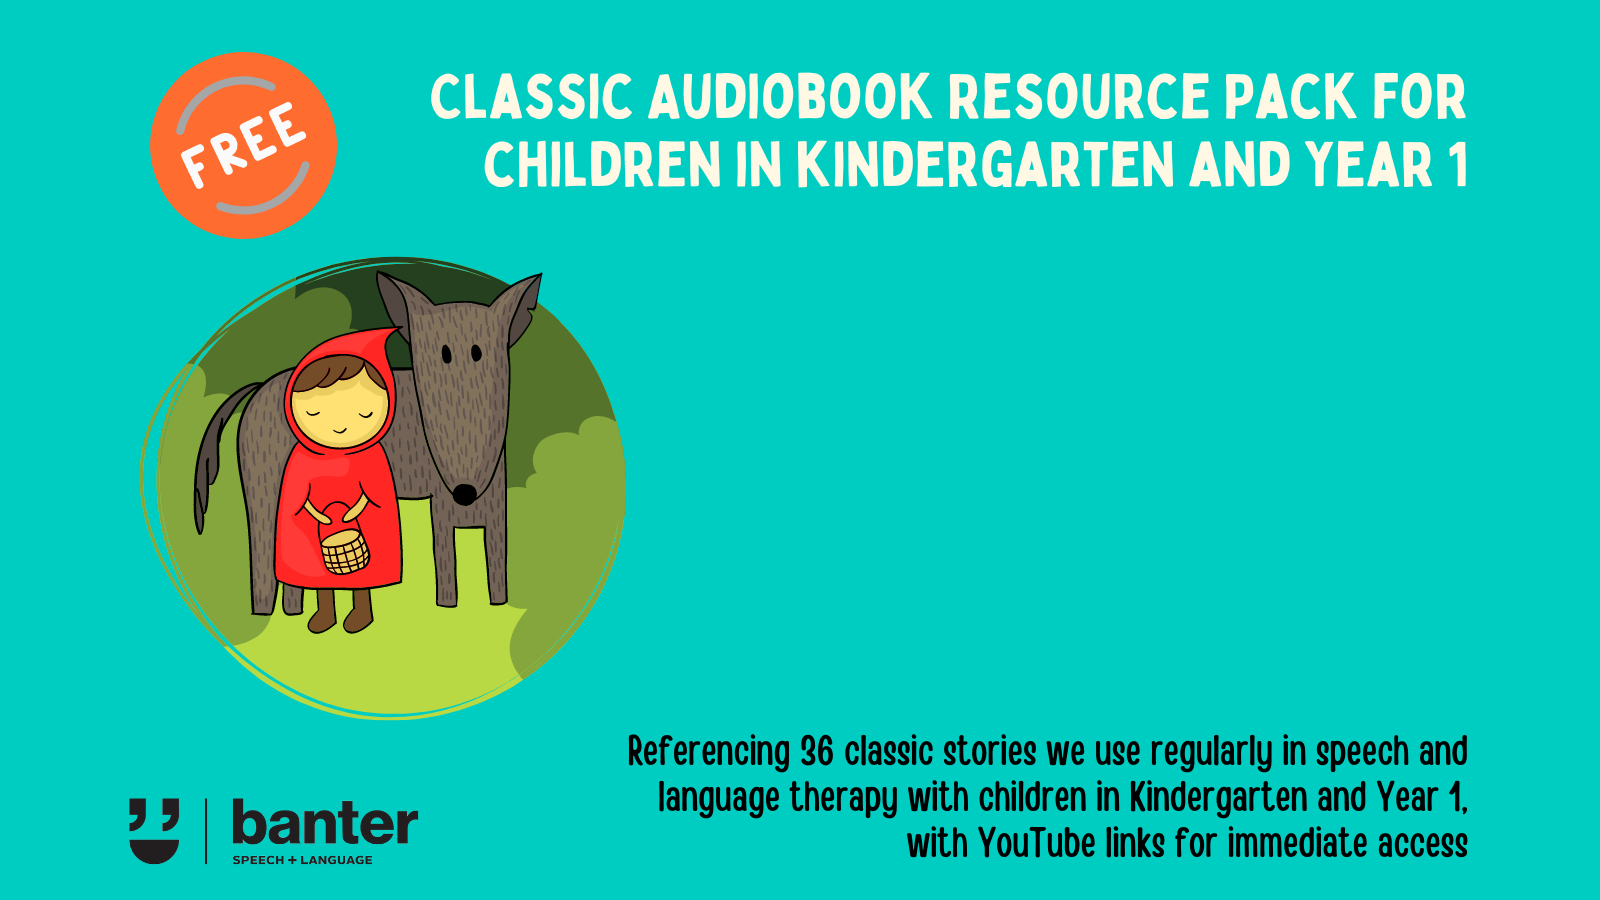 Classic Audiobook Resource Pack for Kindergarten and Year 1